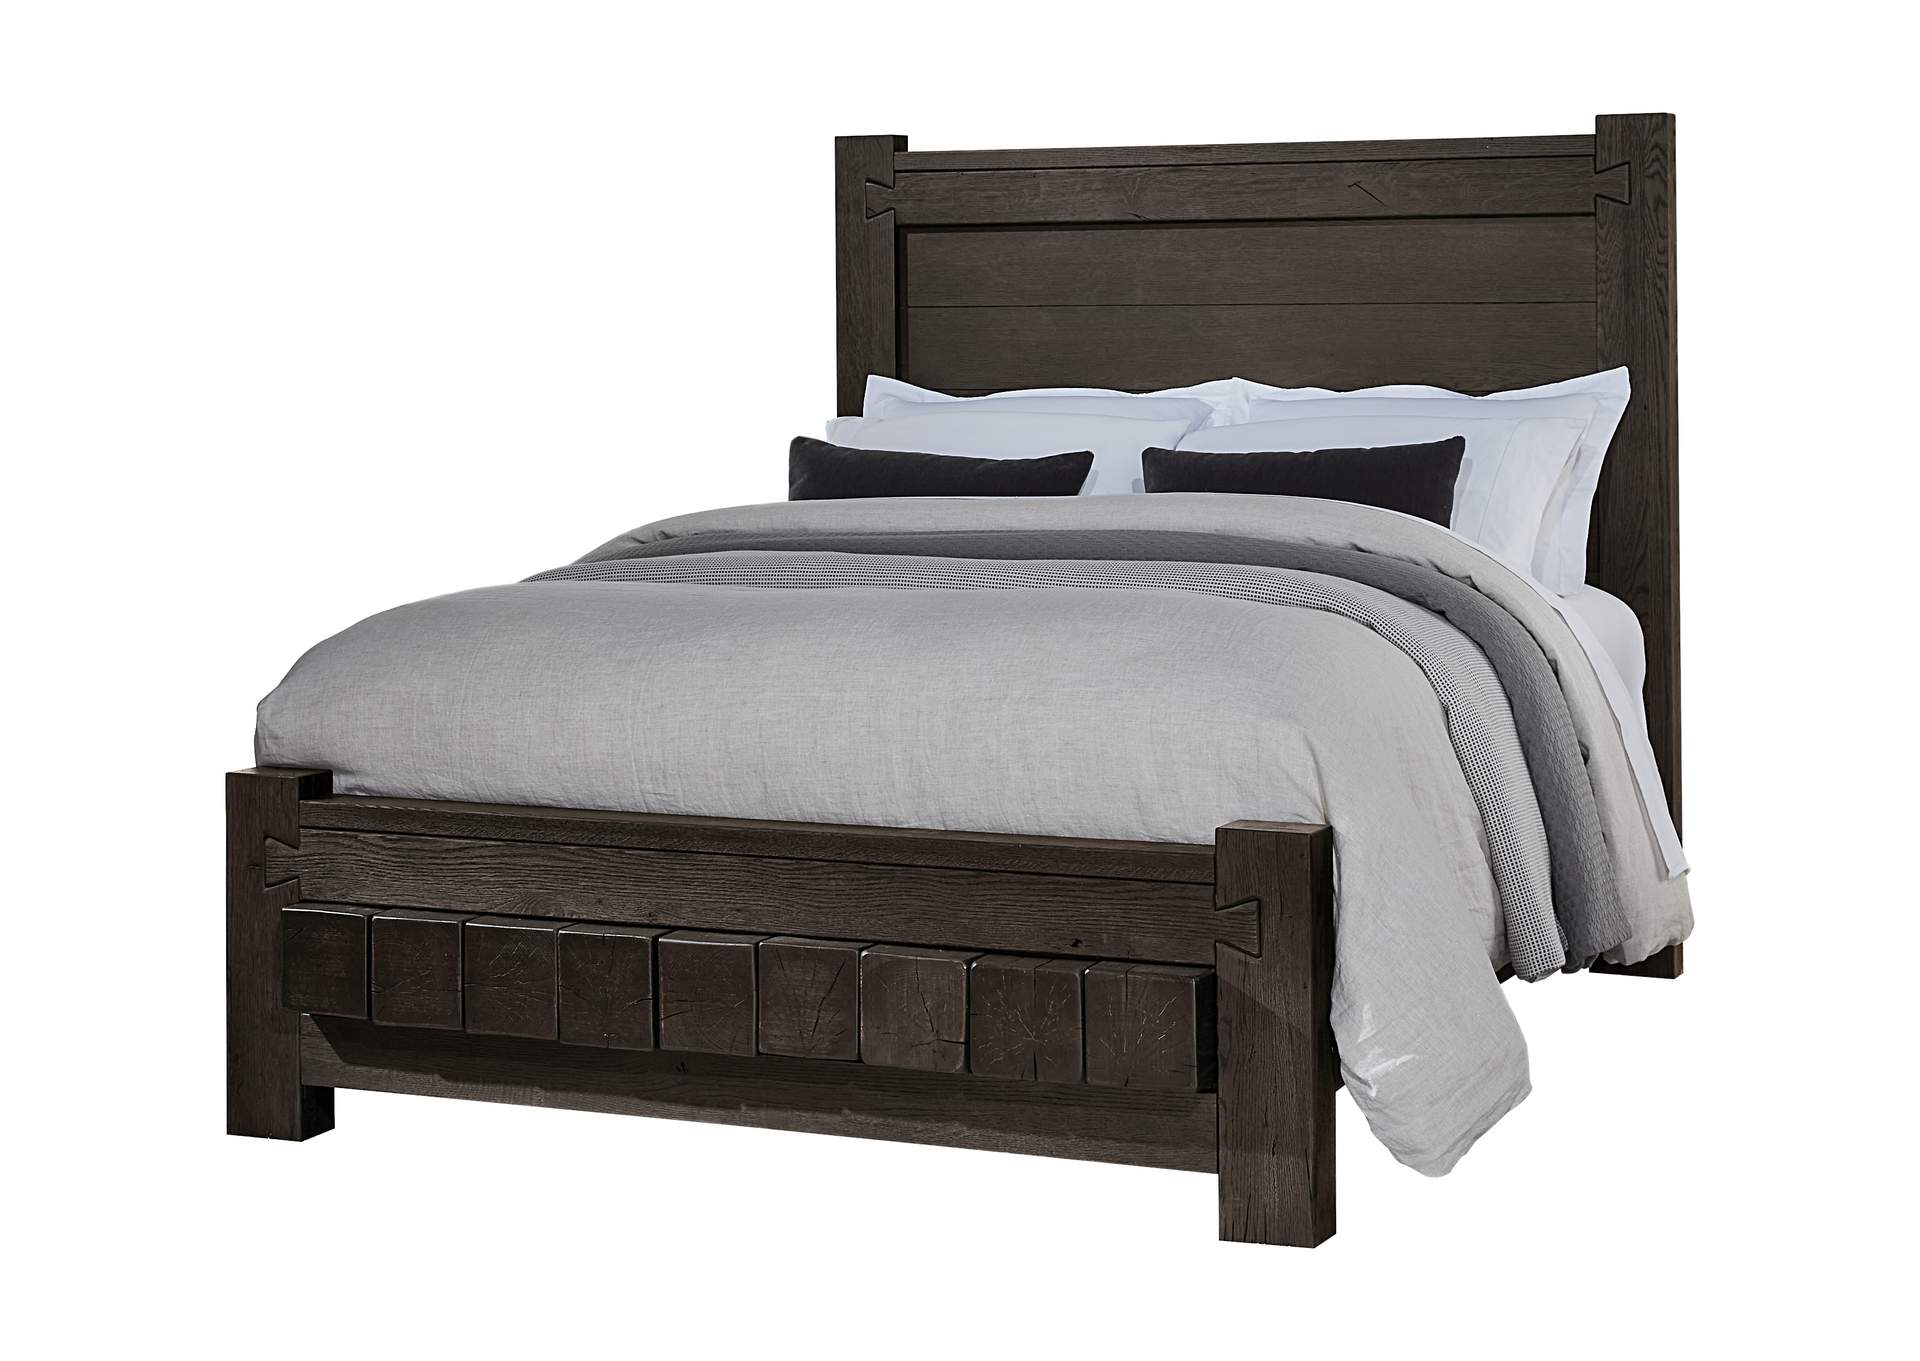 750 - Dovetail-Java Cal King Poster Bed With 6X6 Fb,Vaughan-Bassett